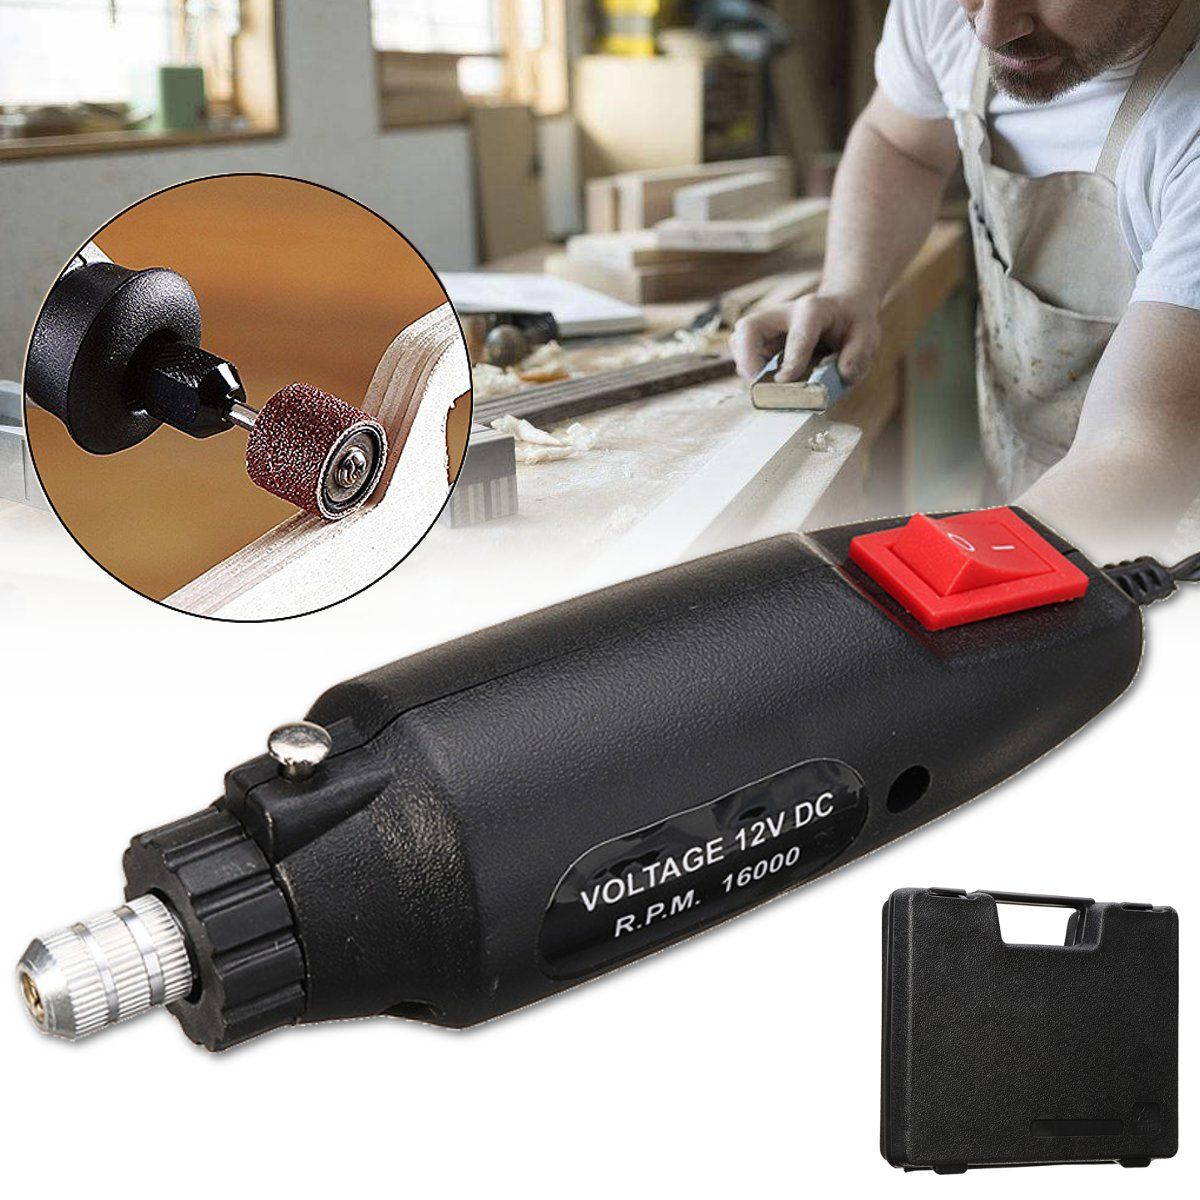 60Pcs-Electric-Polishing-Grinder-Rotary-Tool-Kit-12V-Power-Drill-Machine-amp-Accessories-1332635